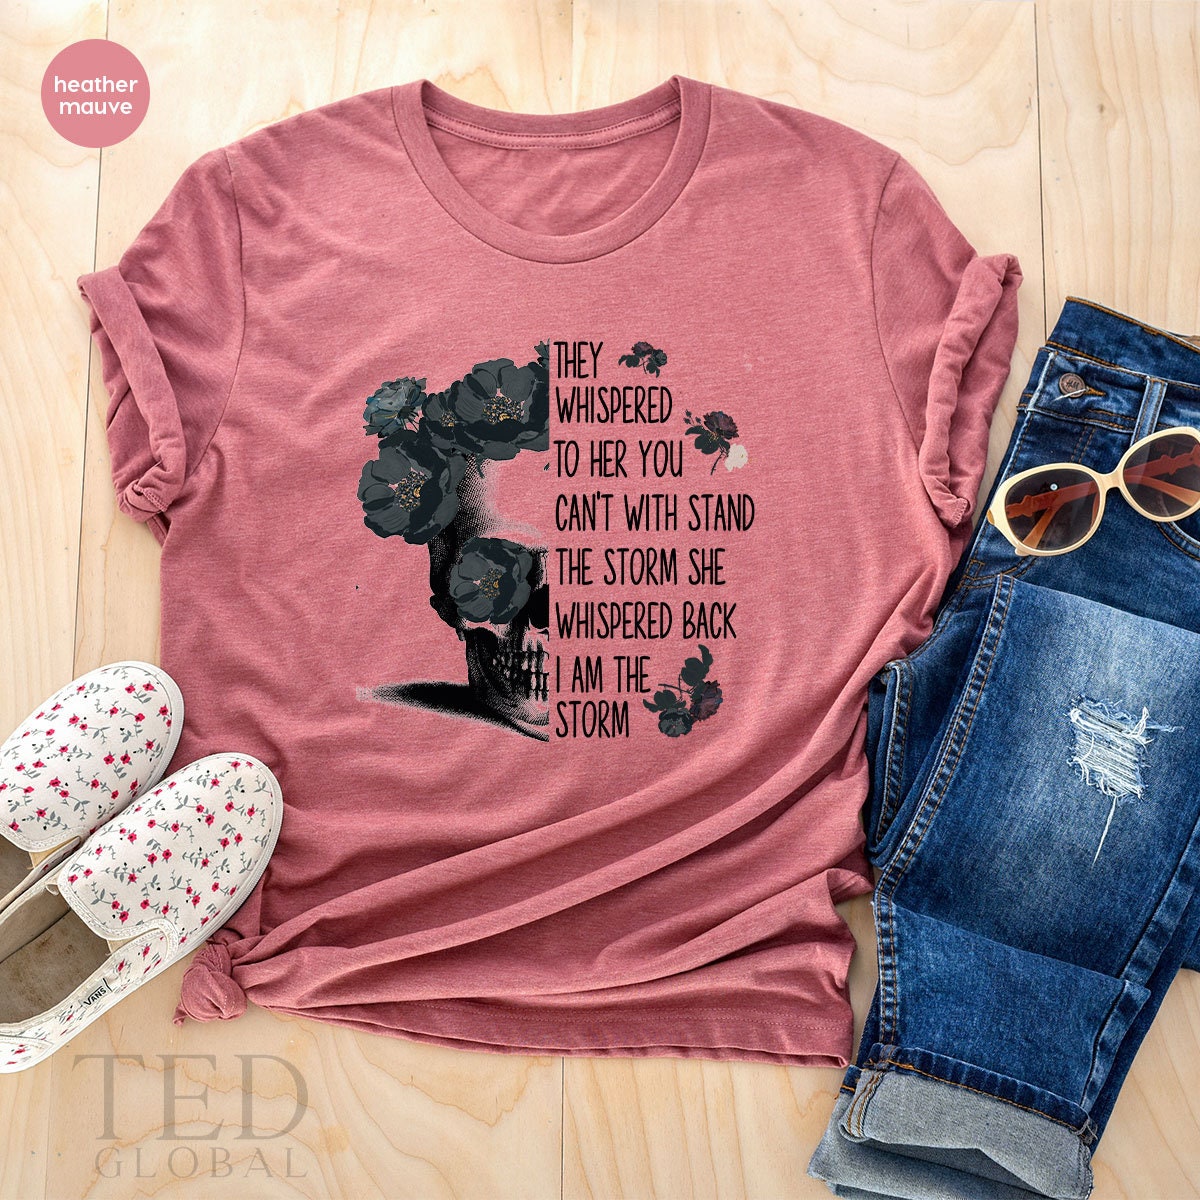 Cute Storm Shirt, Skull Woman Say Shirt, Be The Storm T Shirt, Whispered Shirt, Inspirational Tee, Strong Woman T-Shirt, Gift For Feminist - Fastdeliverytees.com